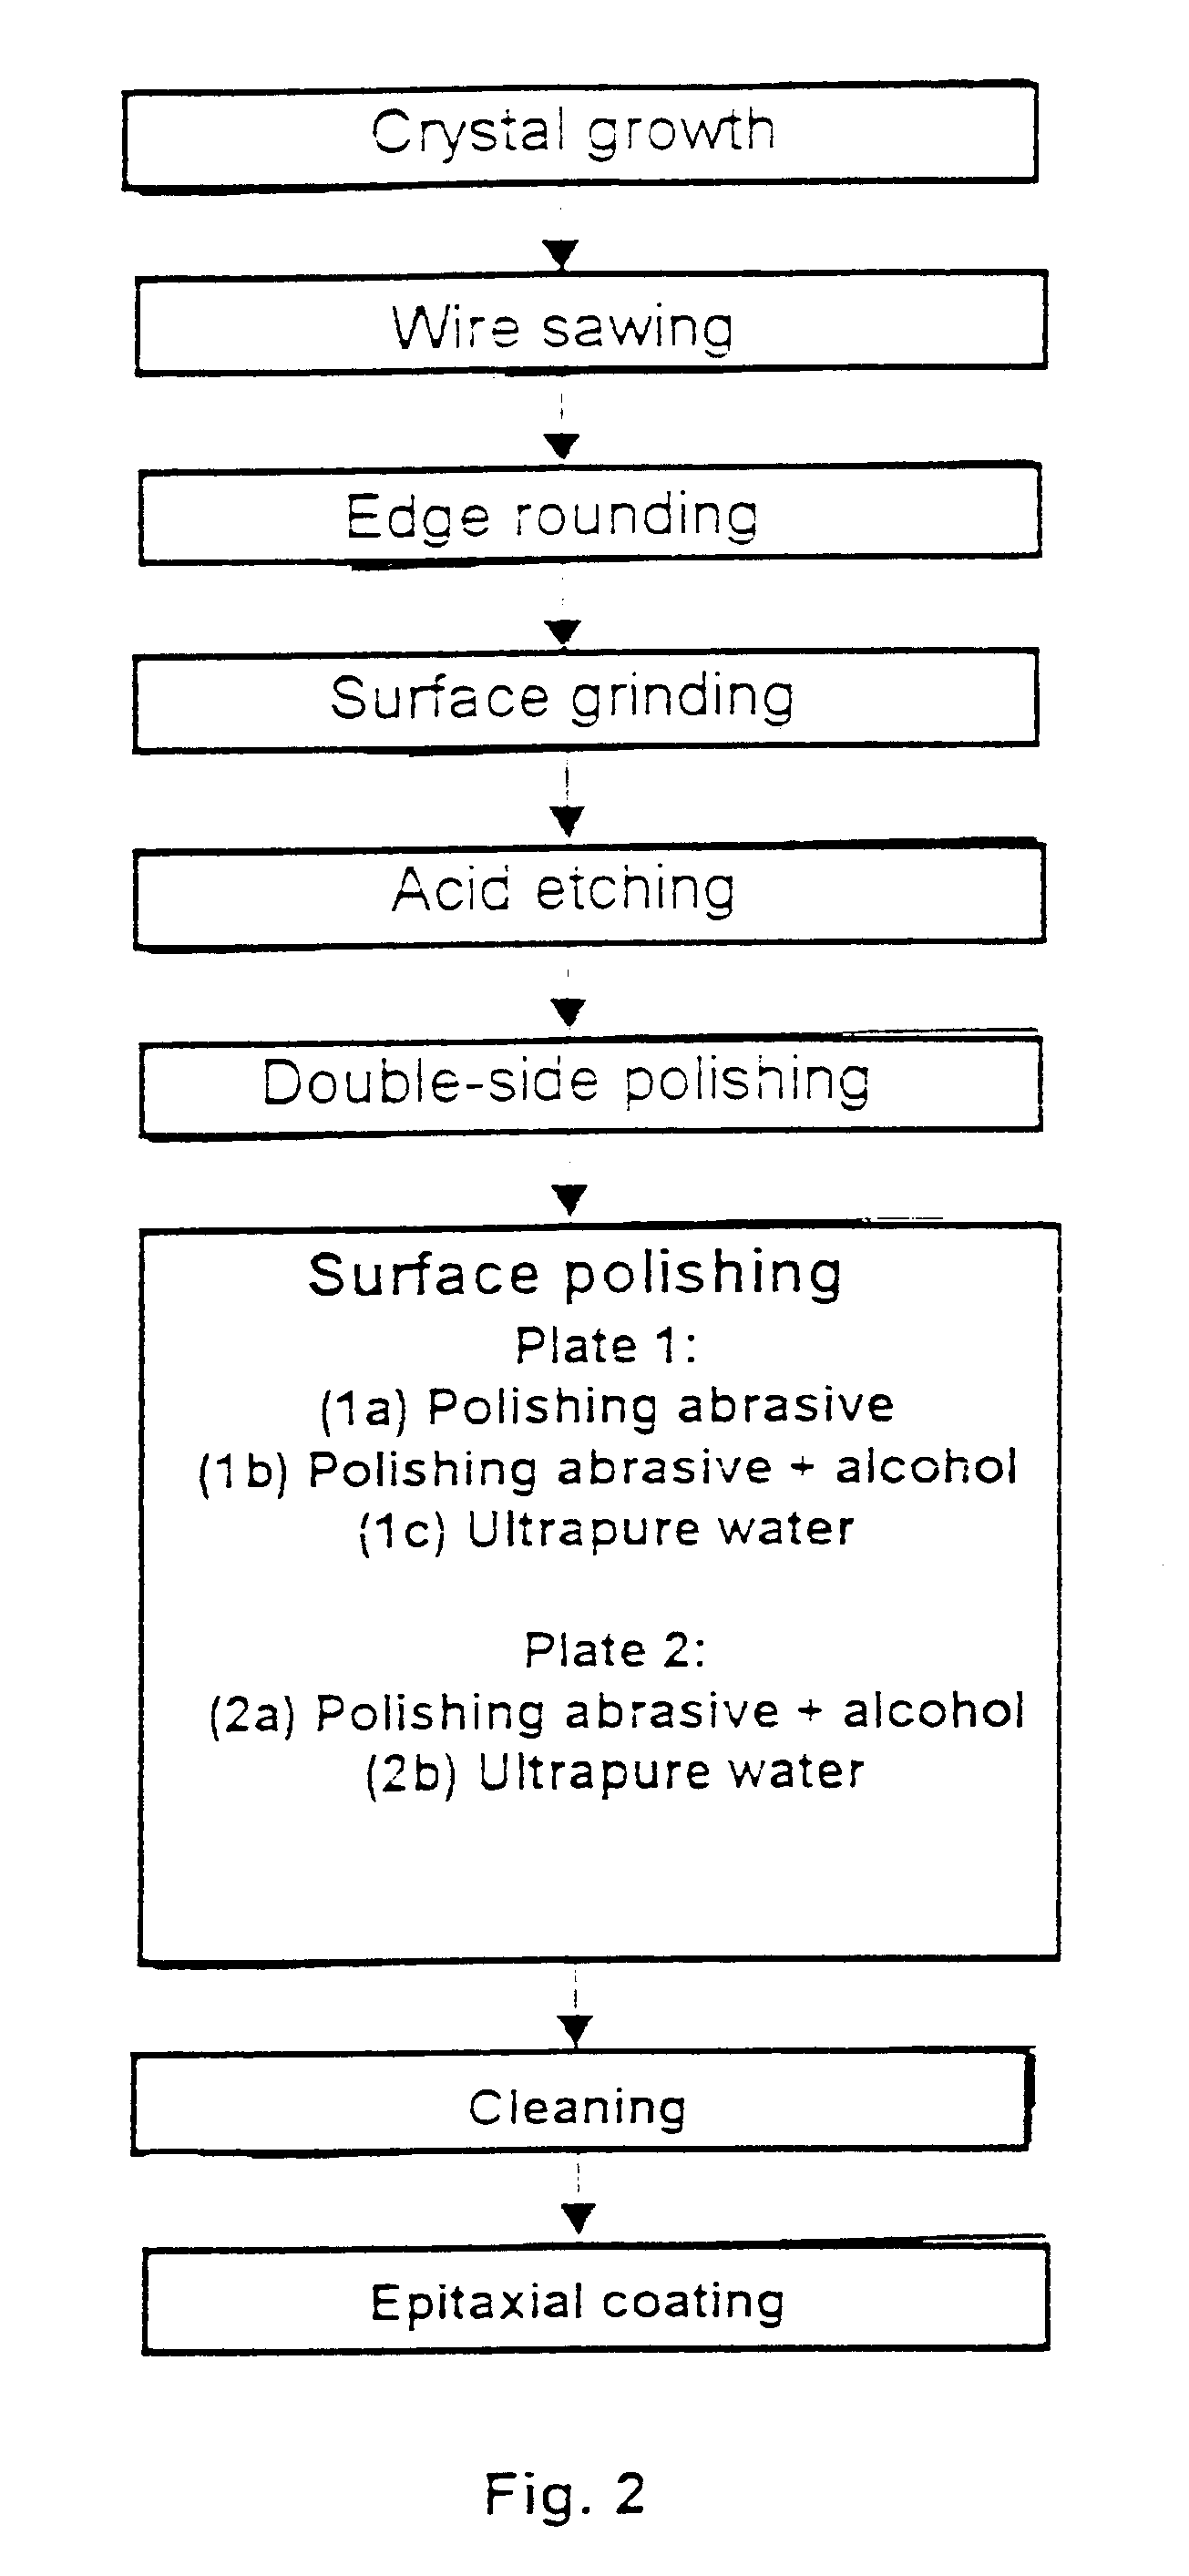 Process for the surface polishing of silicon wafers